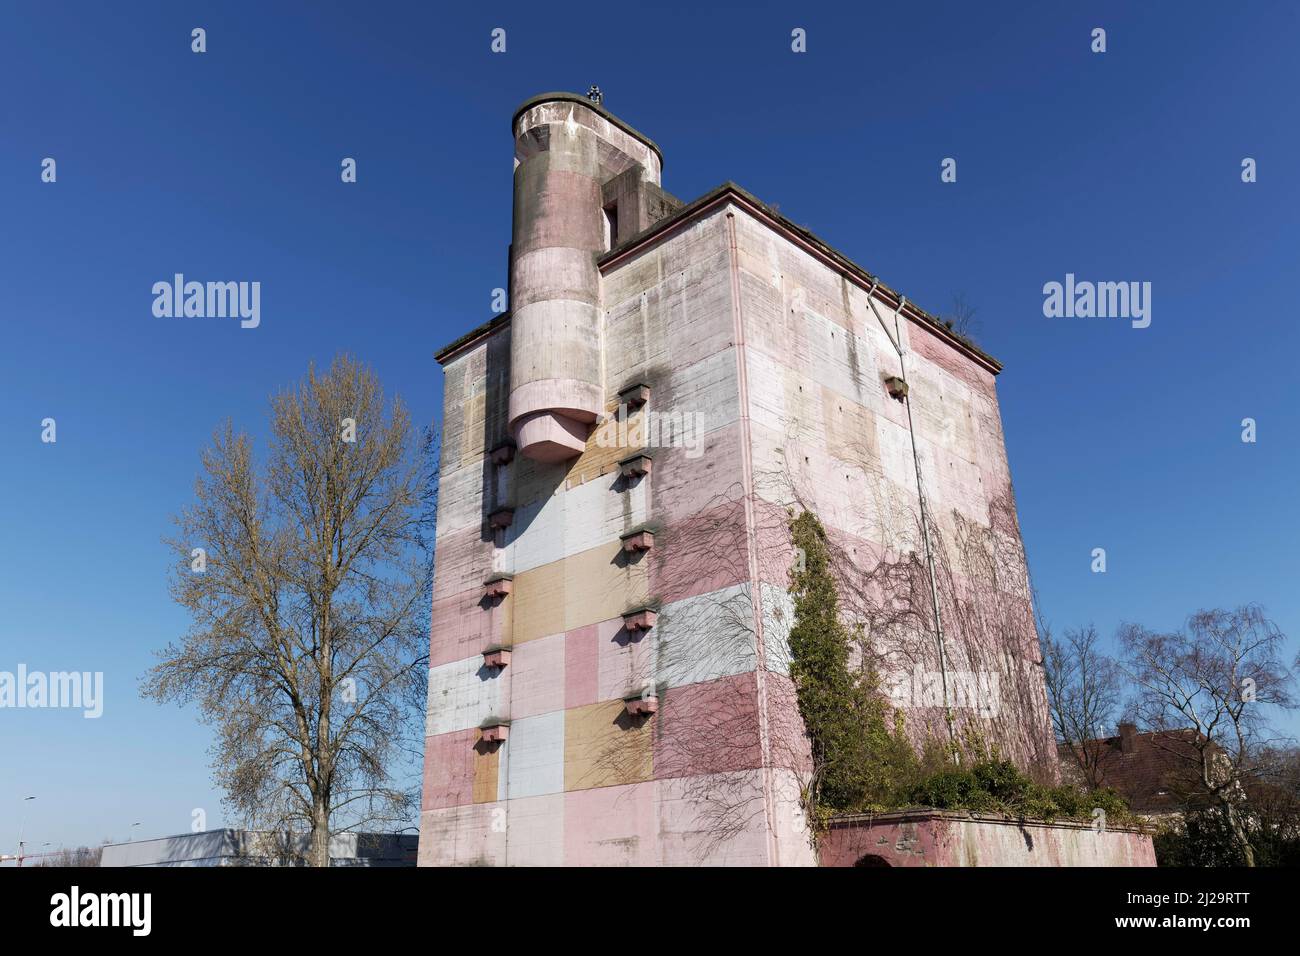 High bunker from World War 2 on the Bayer AG factory premises, facade painted pink, Leverkusen, North Rhine-Westphalia, Germany Stock Photo